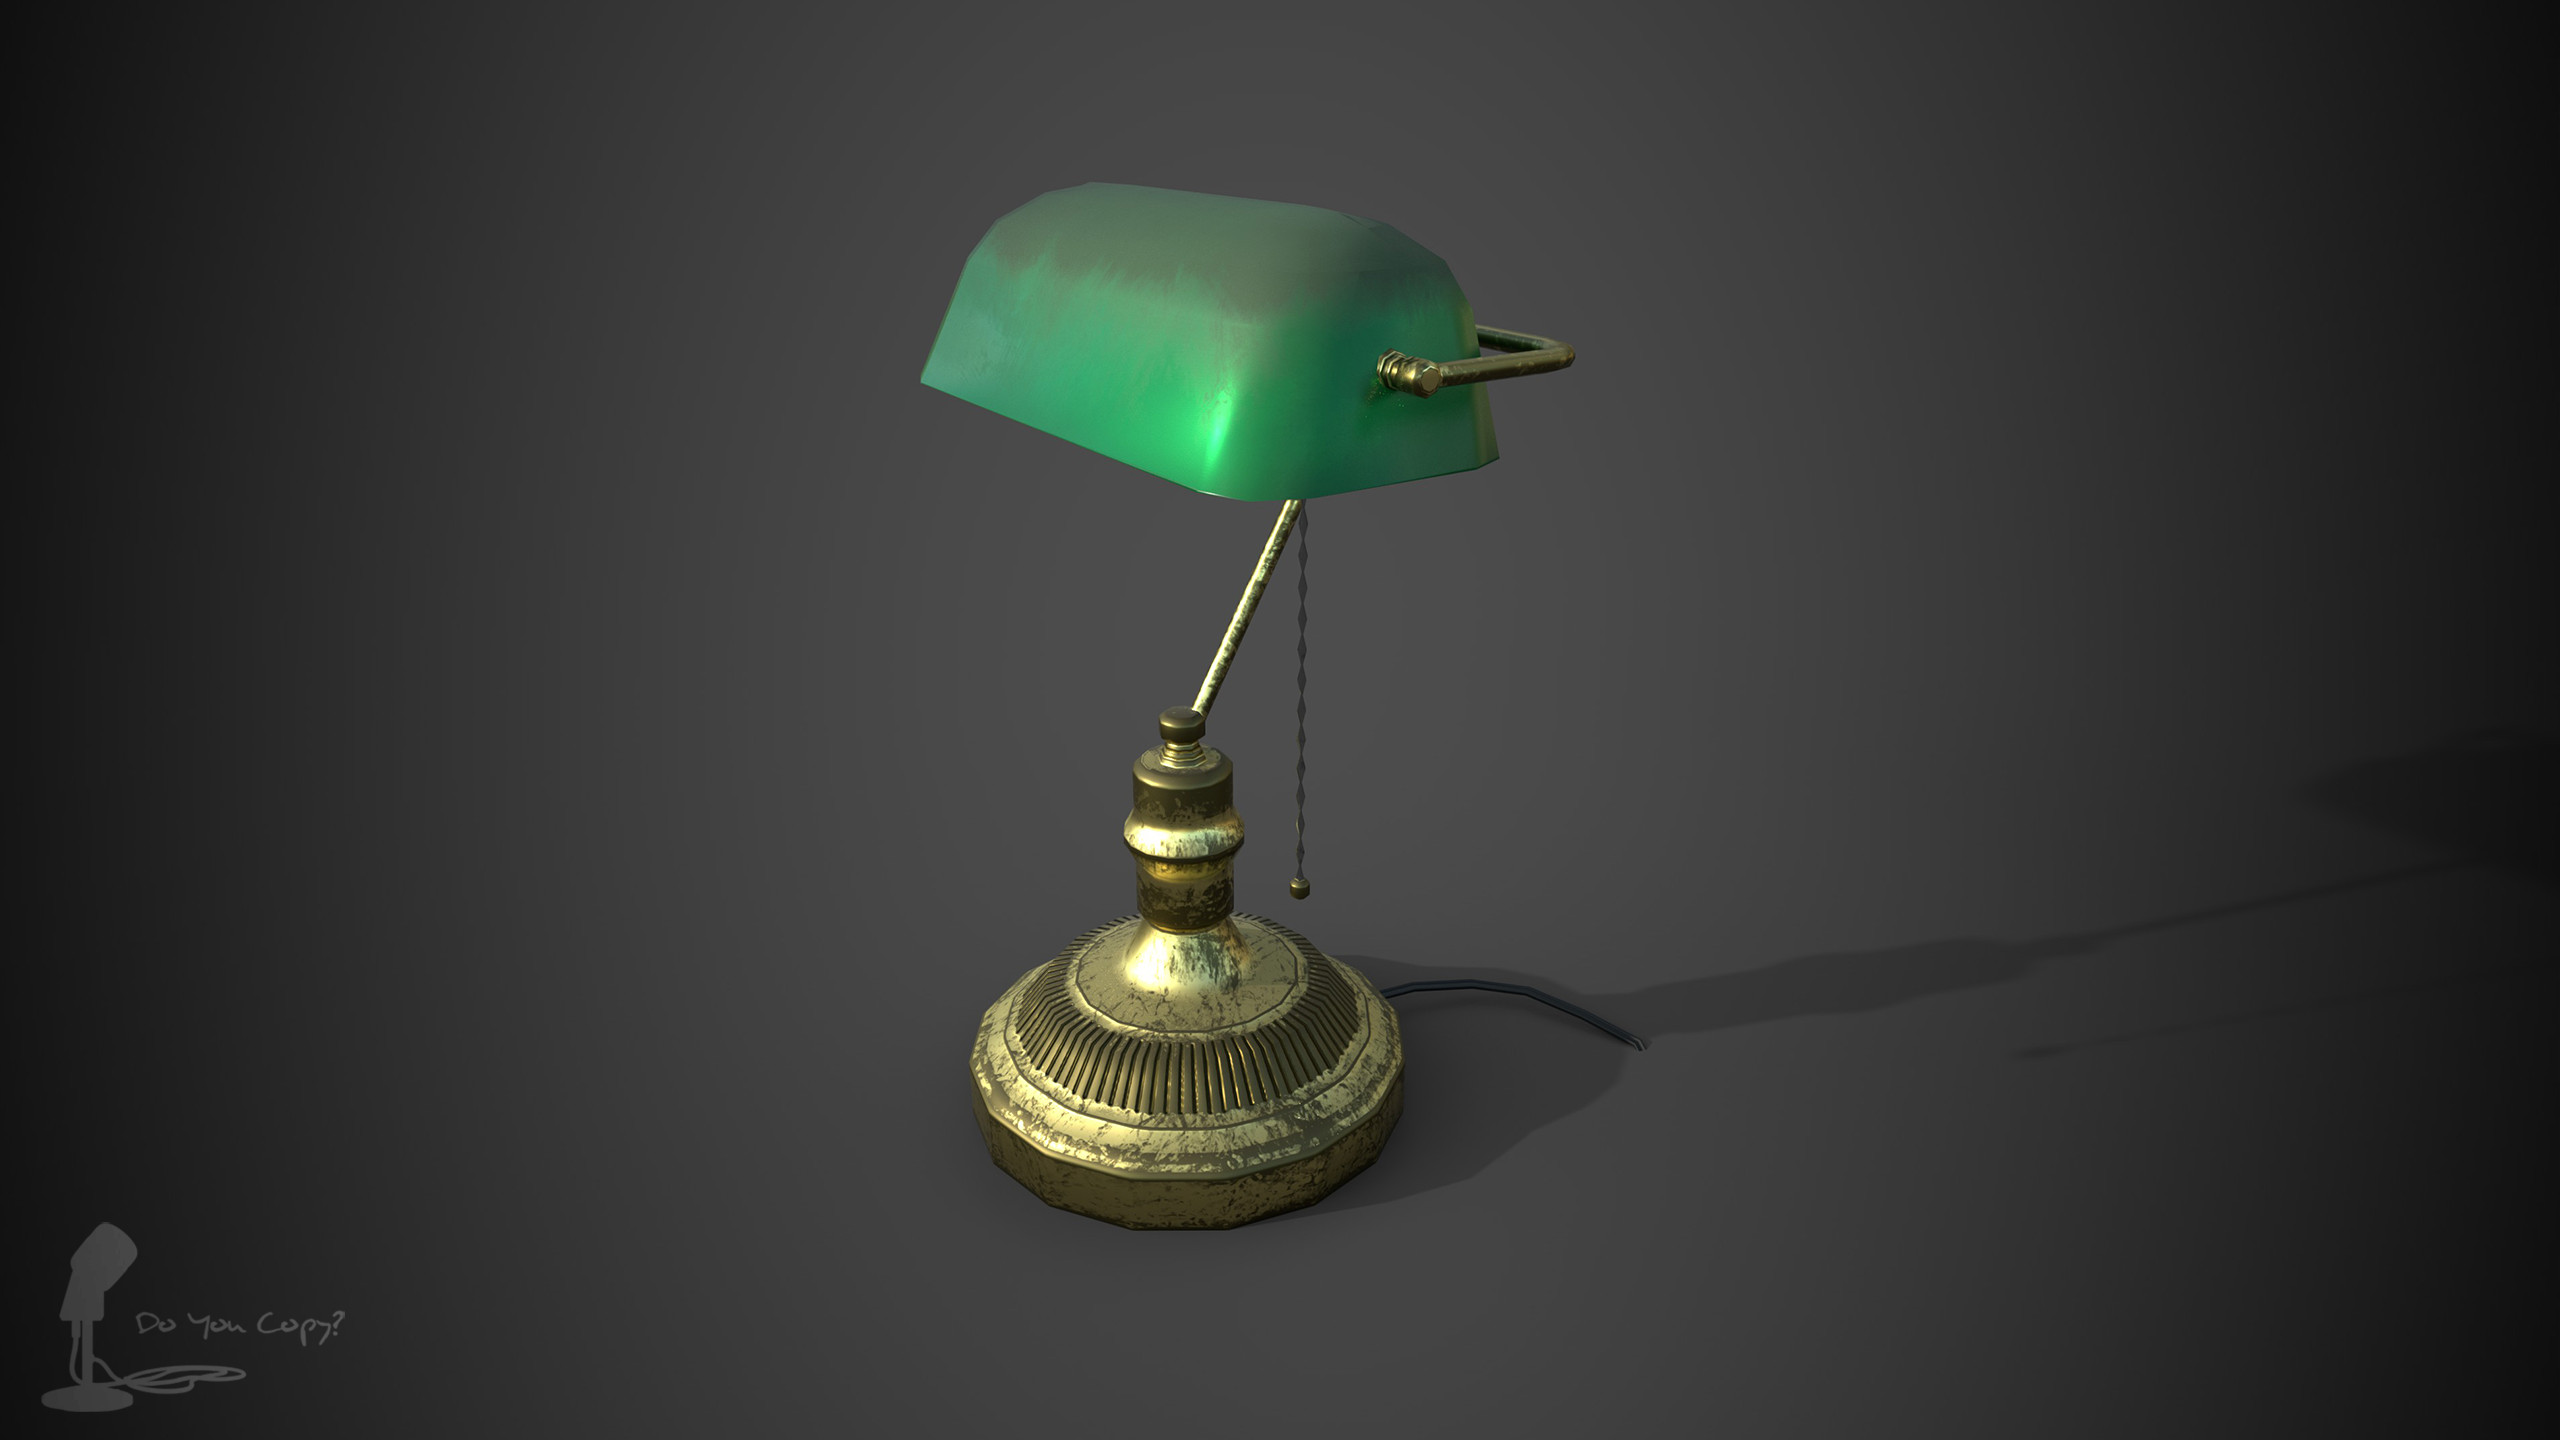 Rendered in Iray with 4k texture.